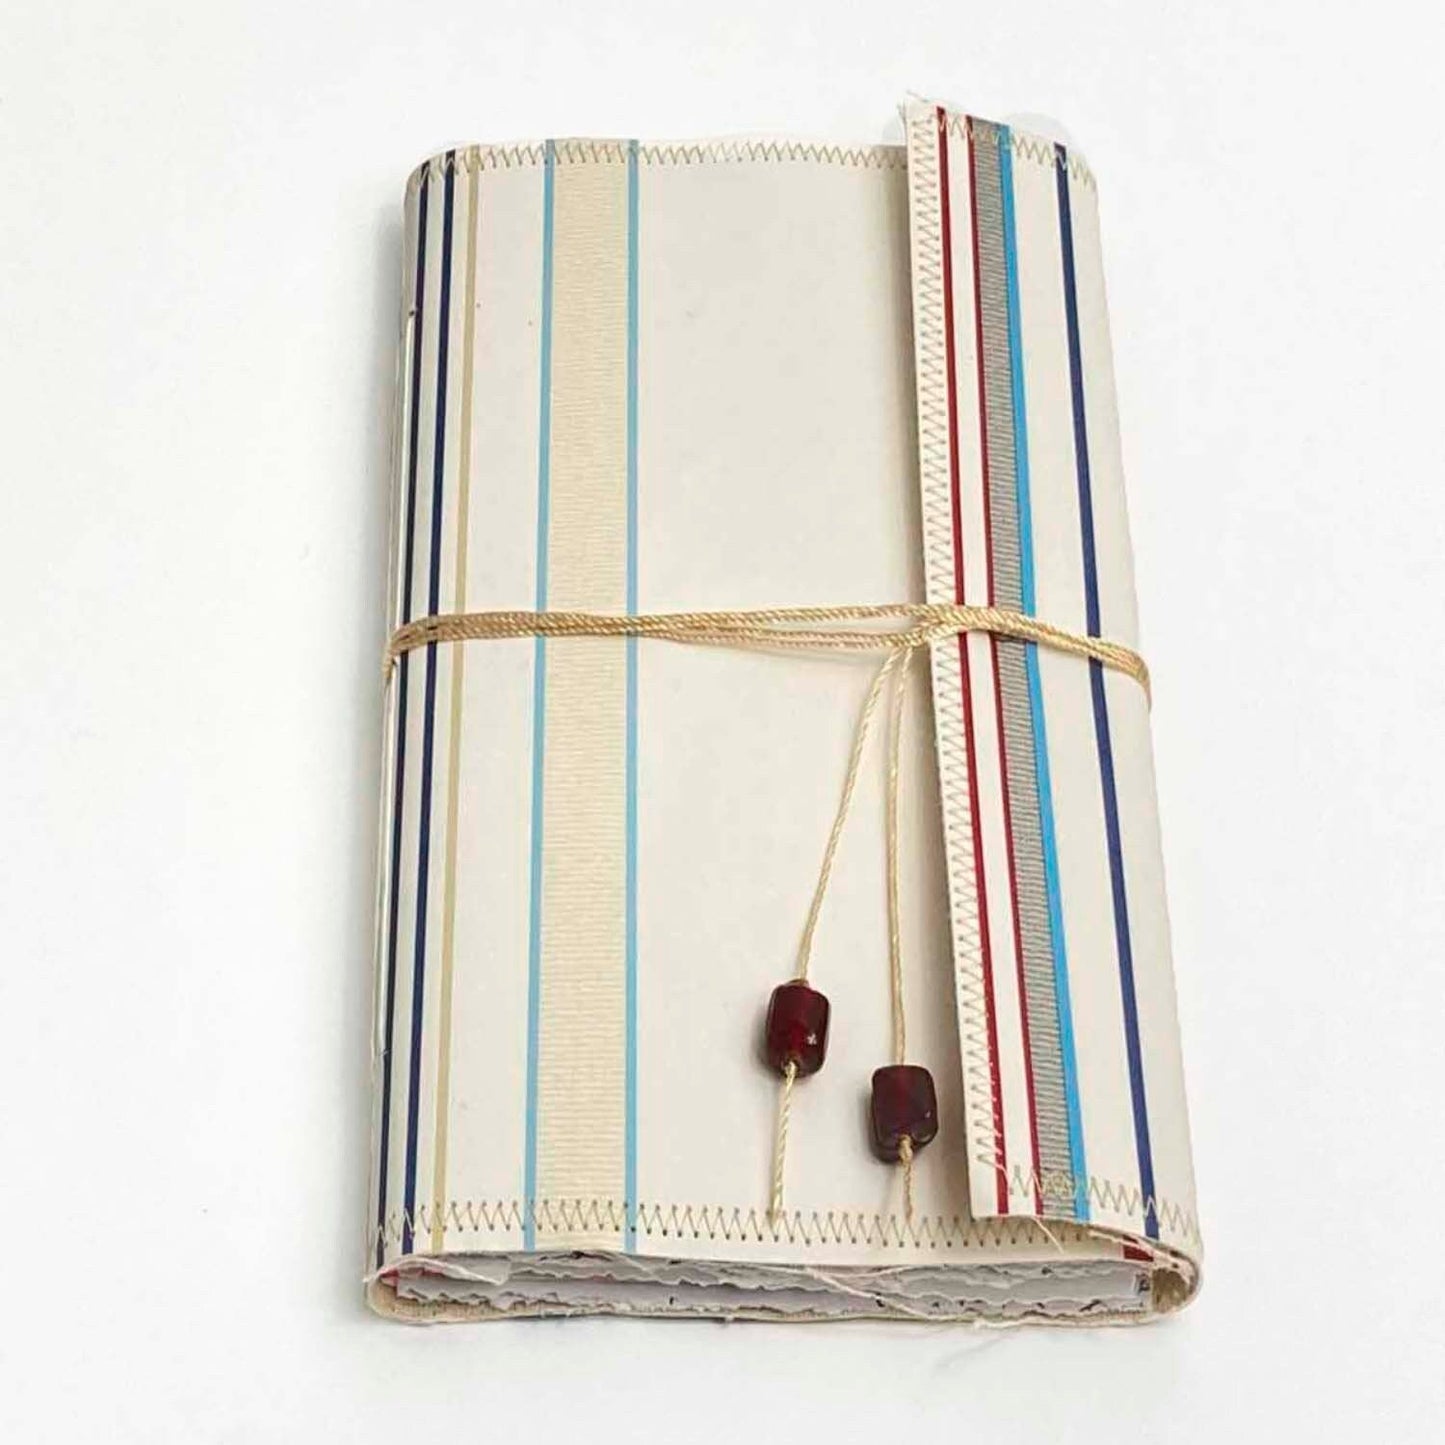 Soft Cover Handmade Junk Journal, Wallet Style, Fits in your Purse